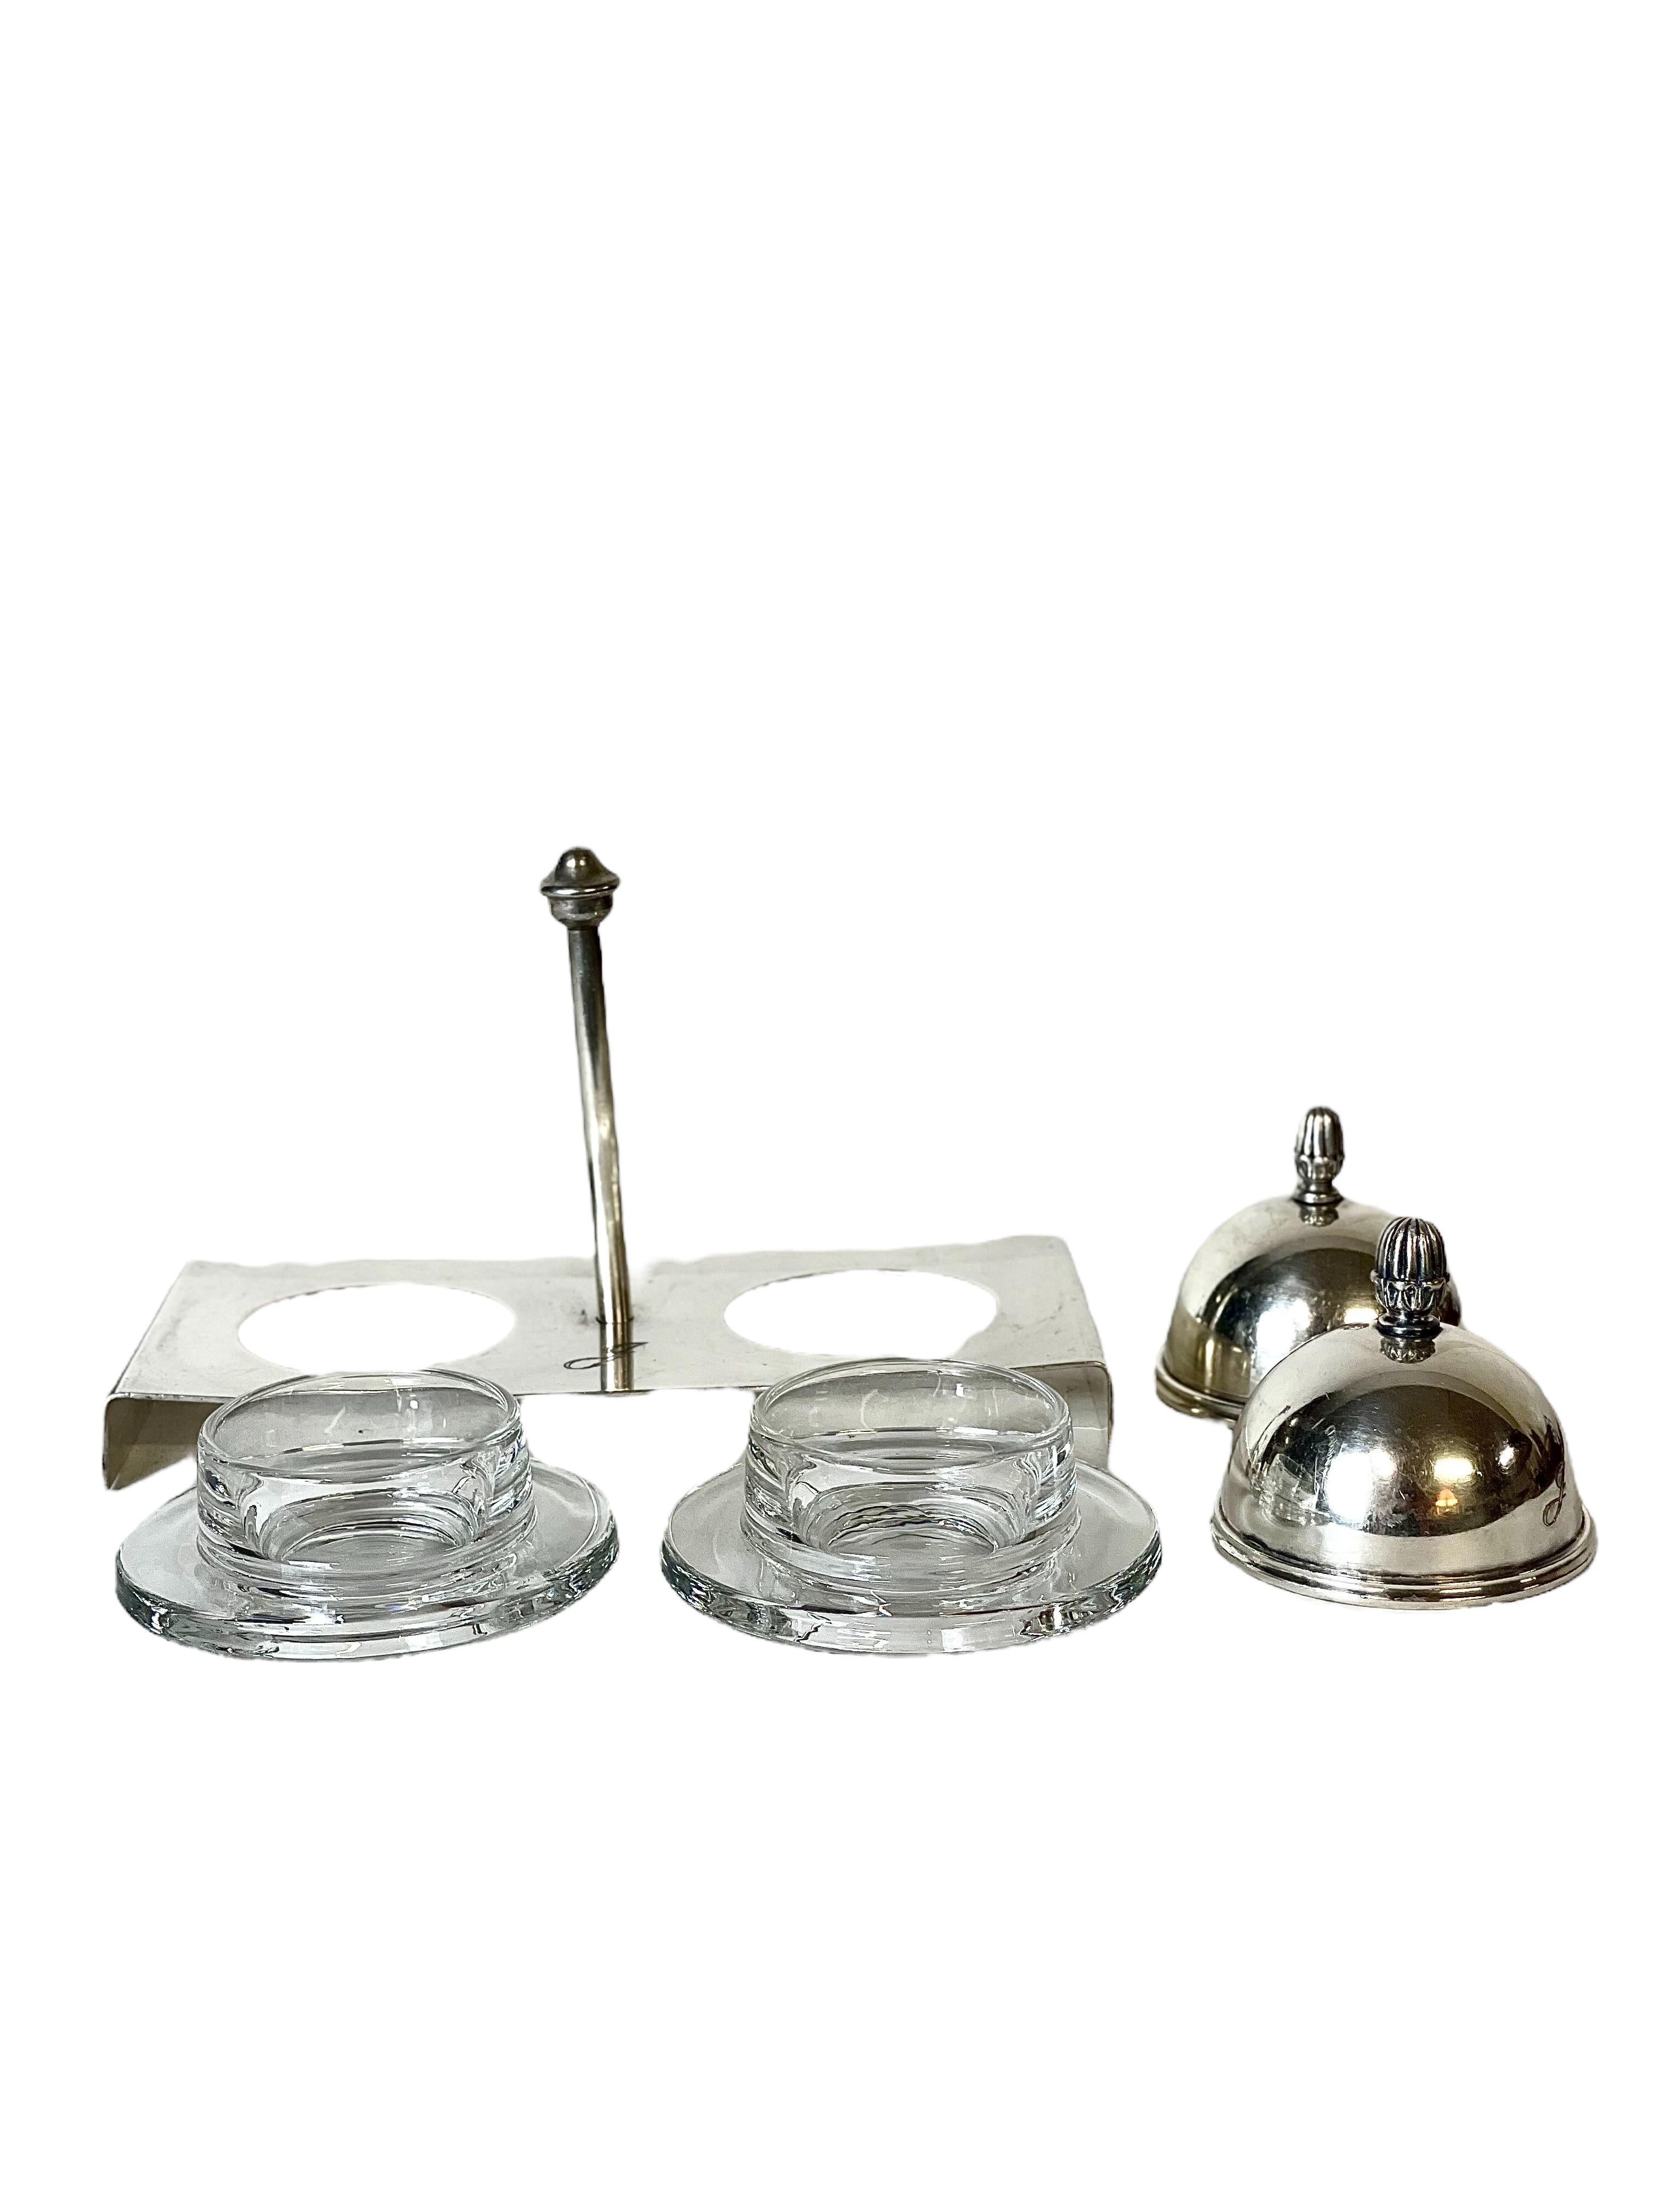 French Silver-Plated Double Butter Dome, from the Hotel Juana For Sale